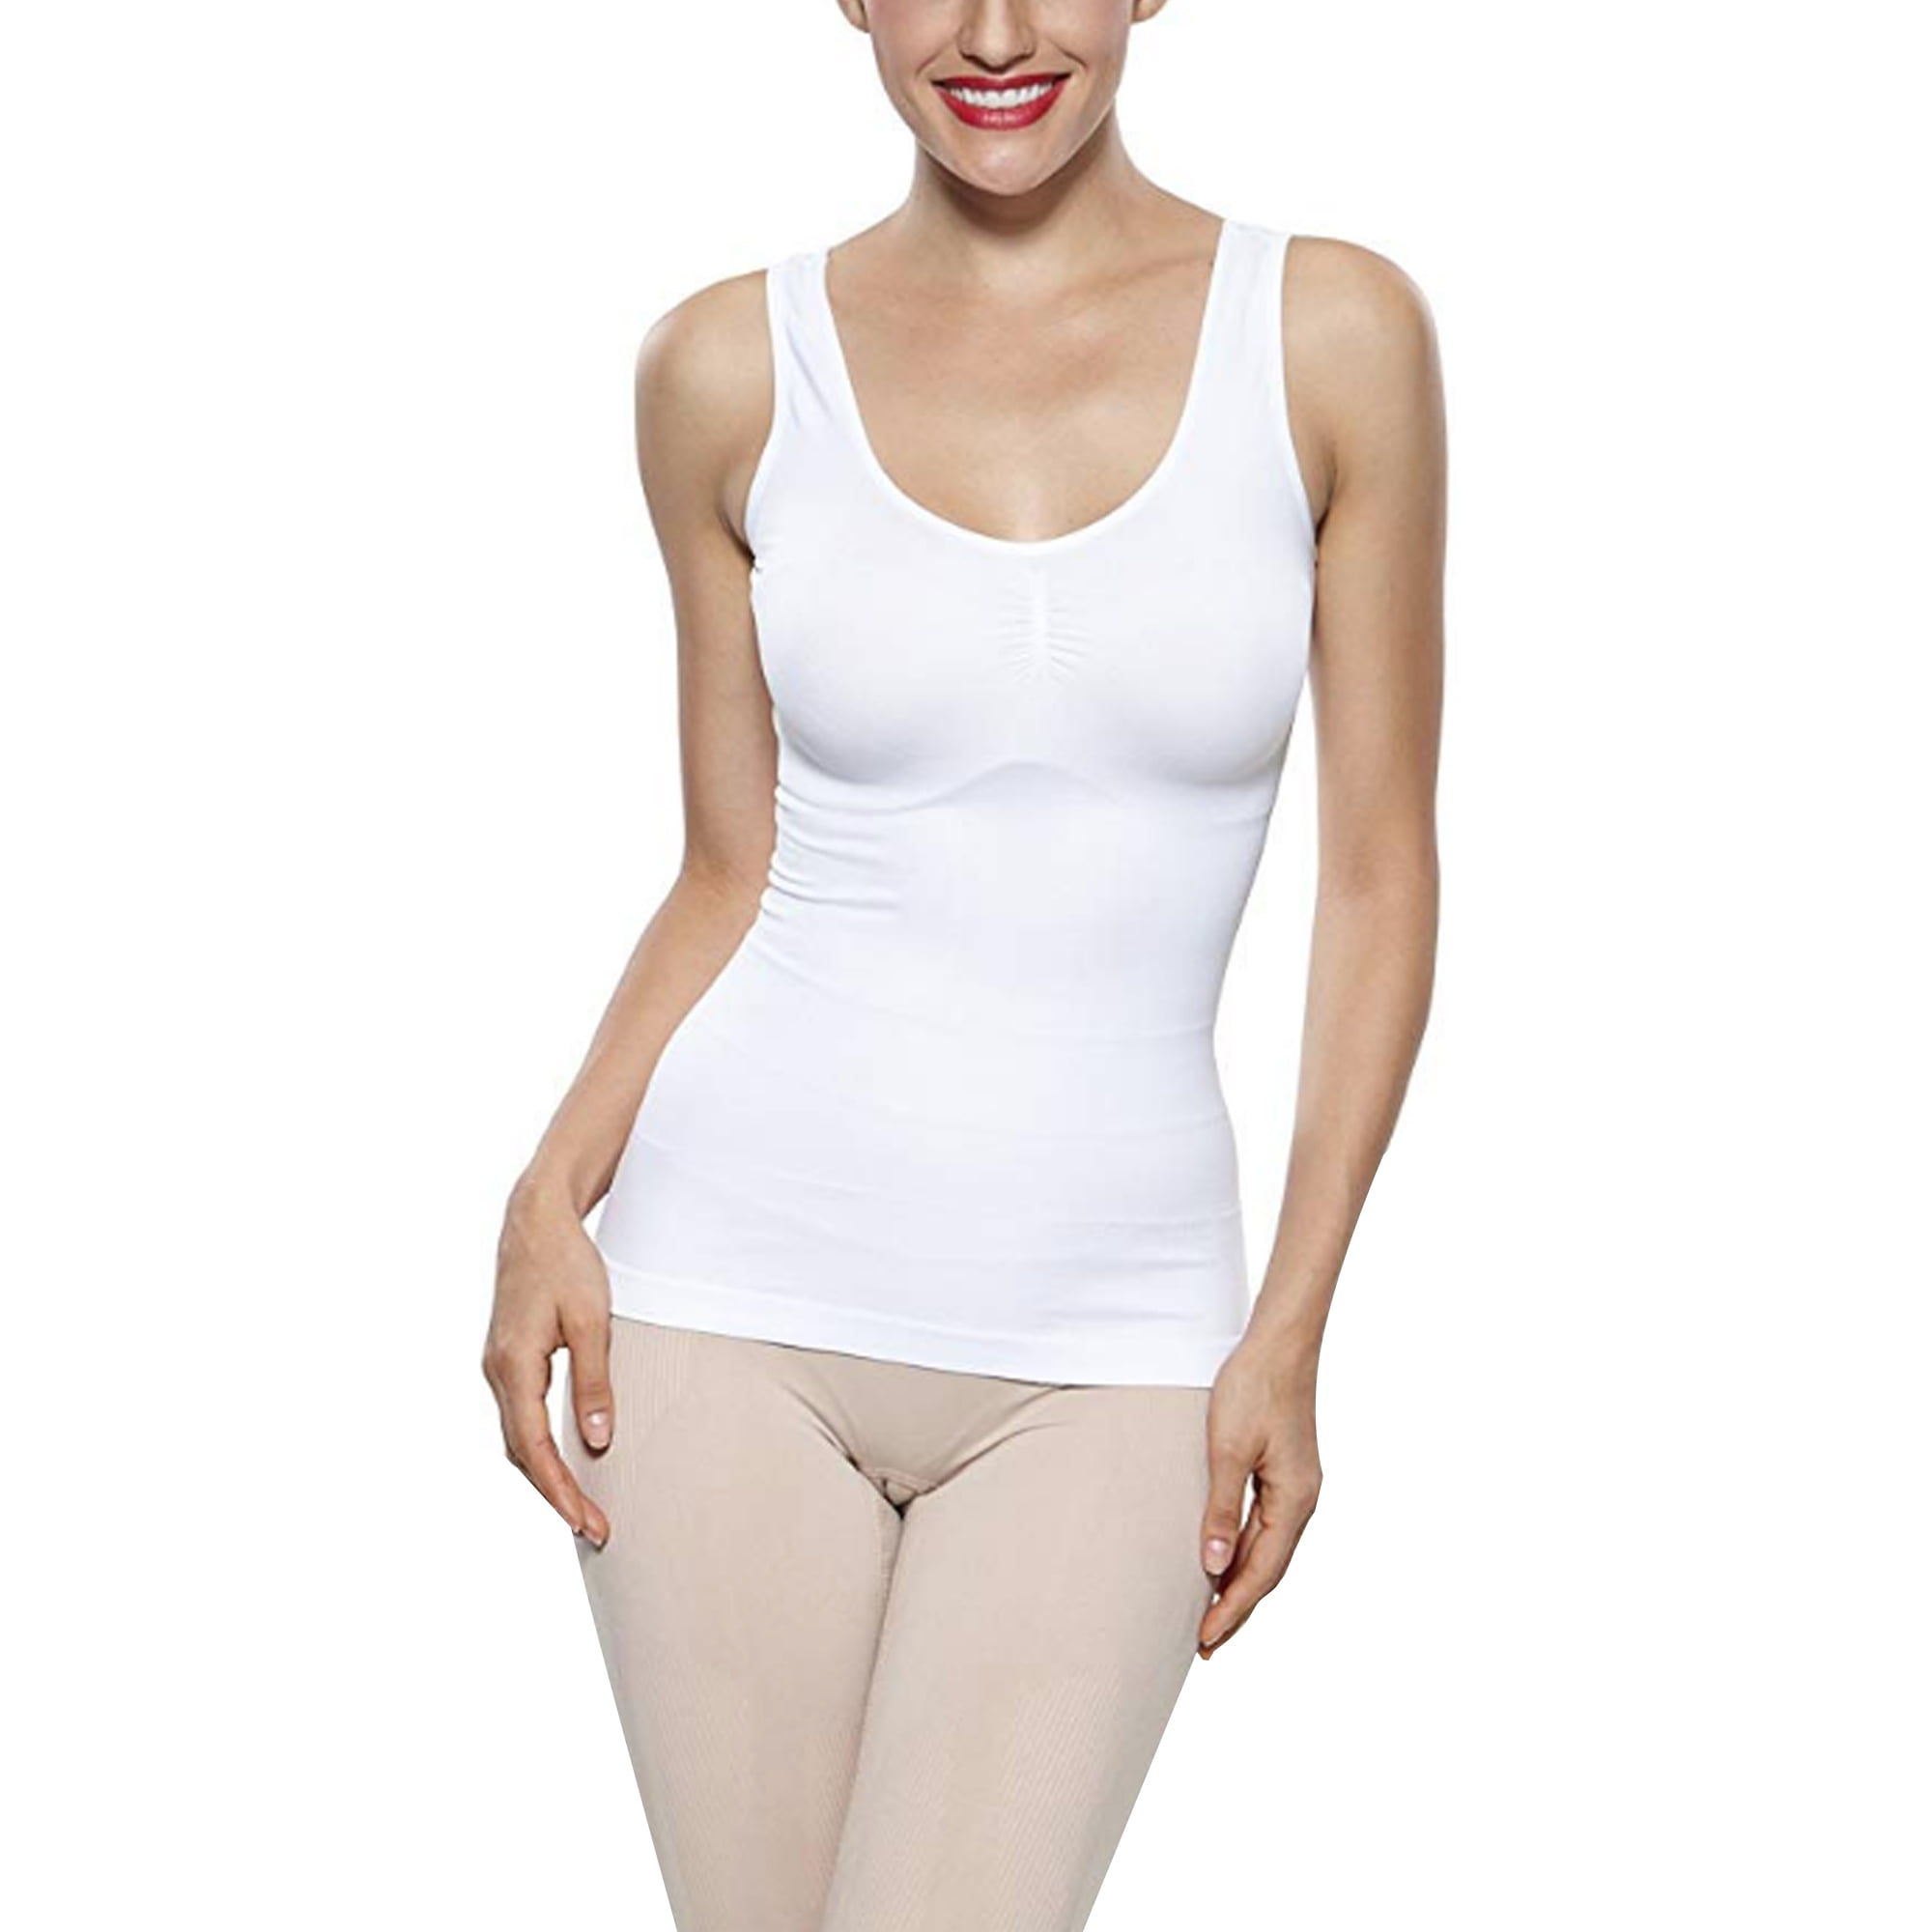 Acappella Women's Seamless Tummy Control Shapewear Comfort Camisole Long  Compression Tank Top, White, US S-M 